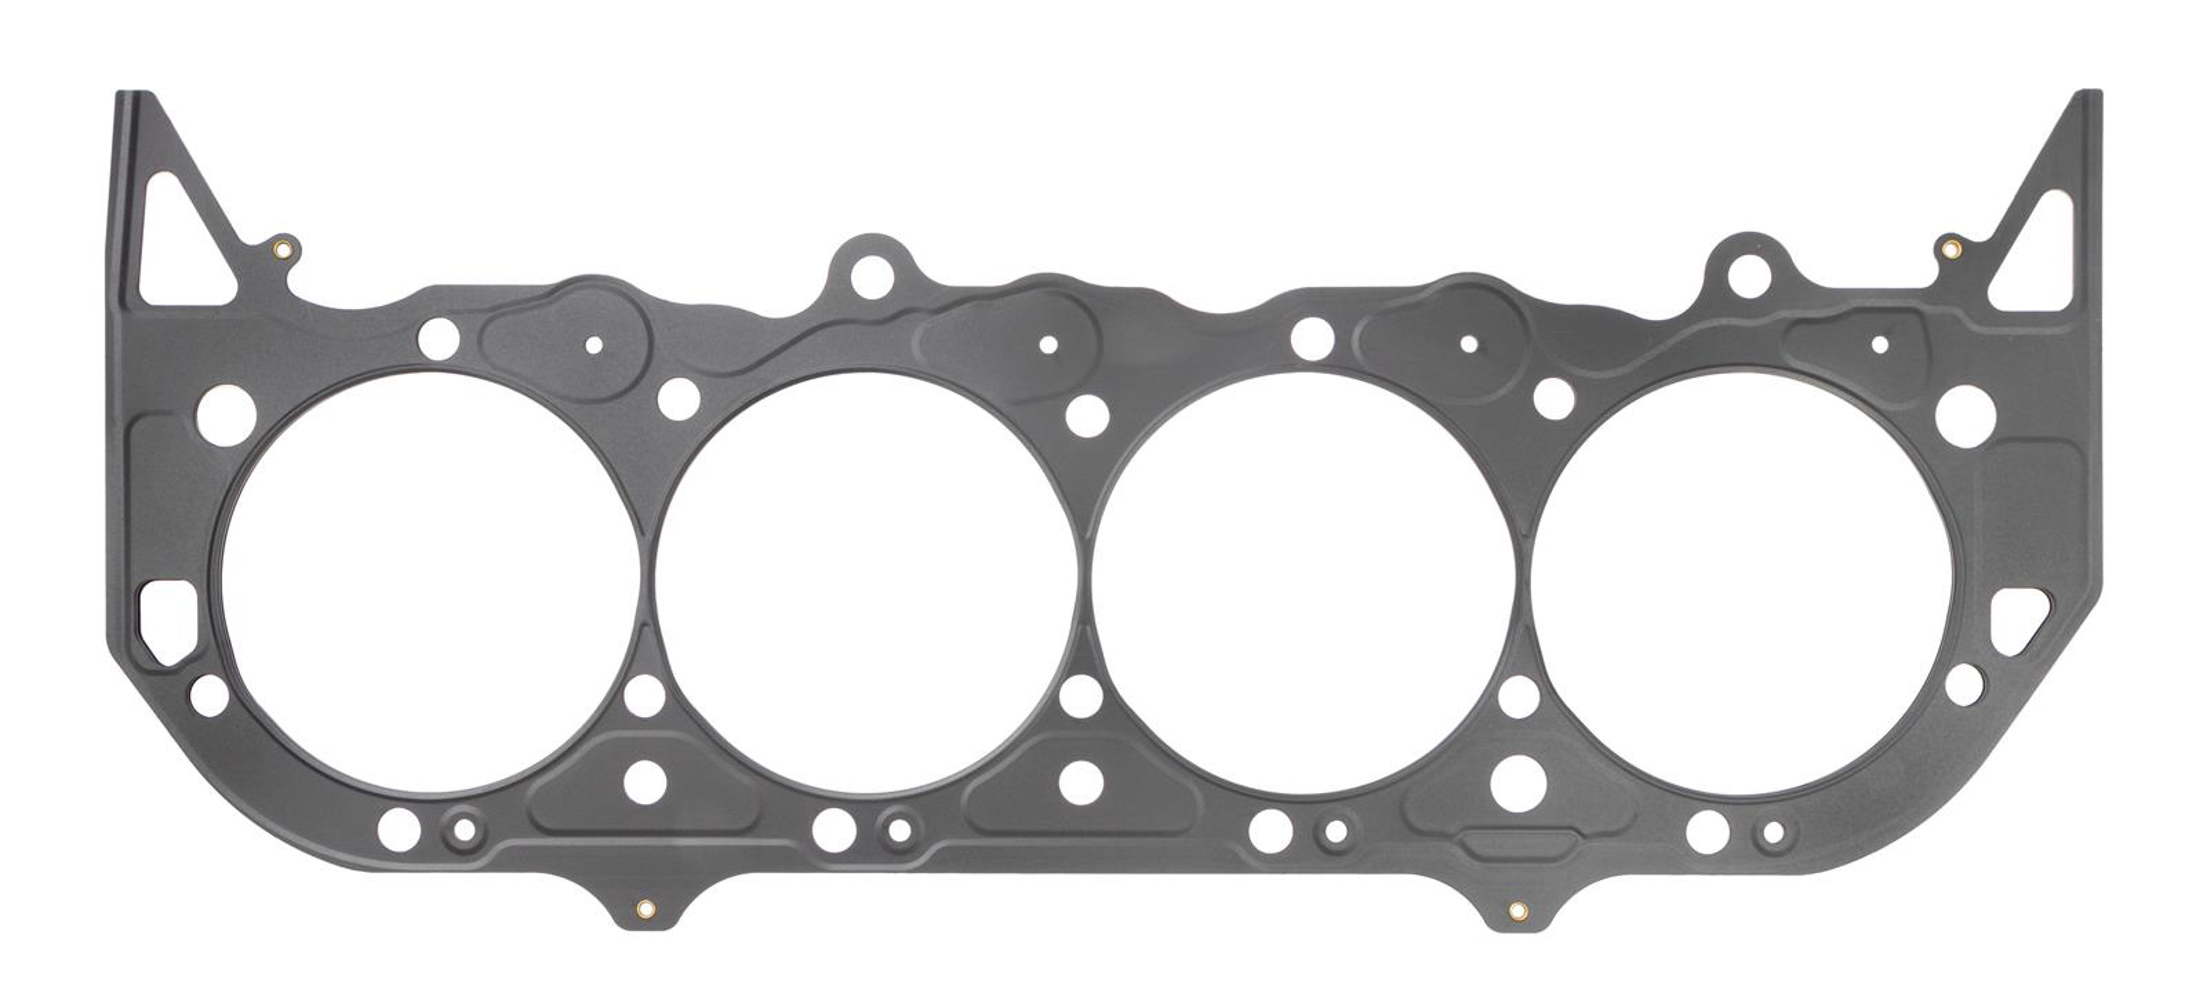 SCE Gaskets M146339 - Cylinder Head Gasket, MLS Spartan, 4.630 in Bore, 0.039 in Compression Thickness, Multi-Layer Steel, Big Block Chevy, Each